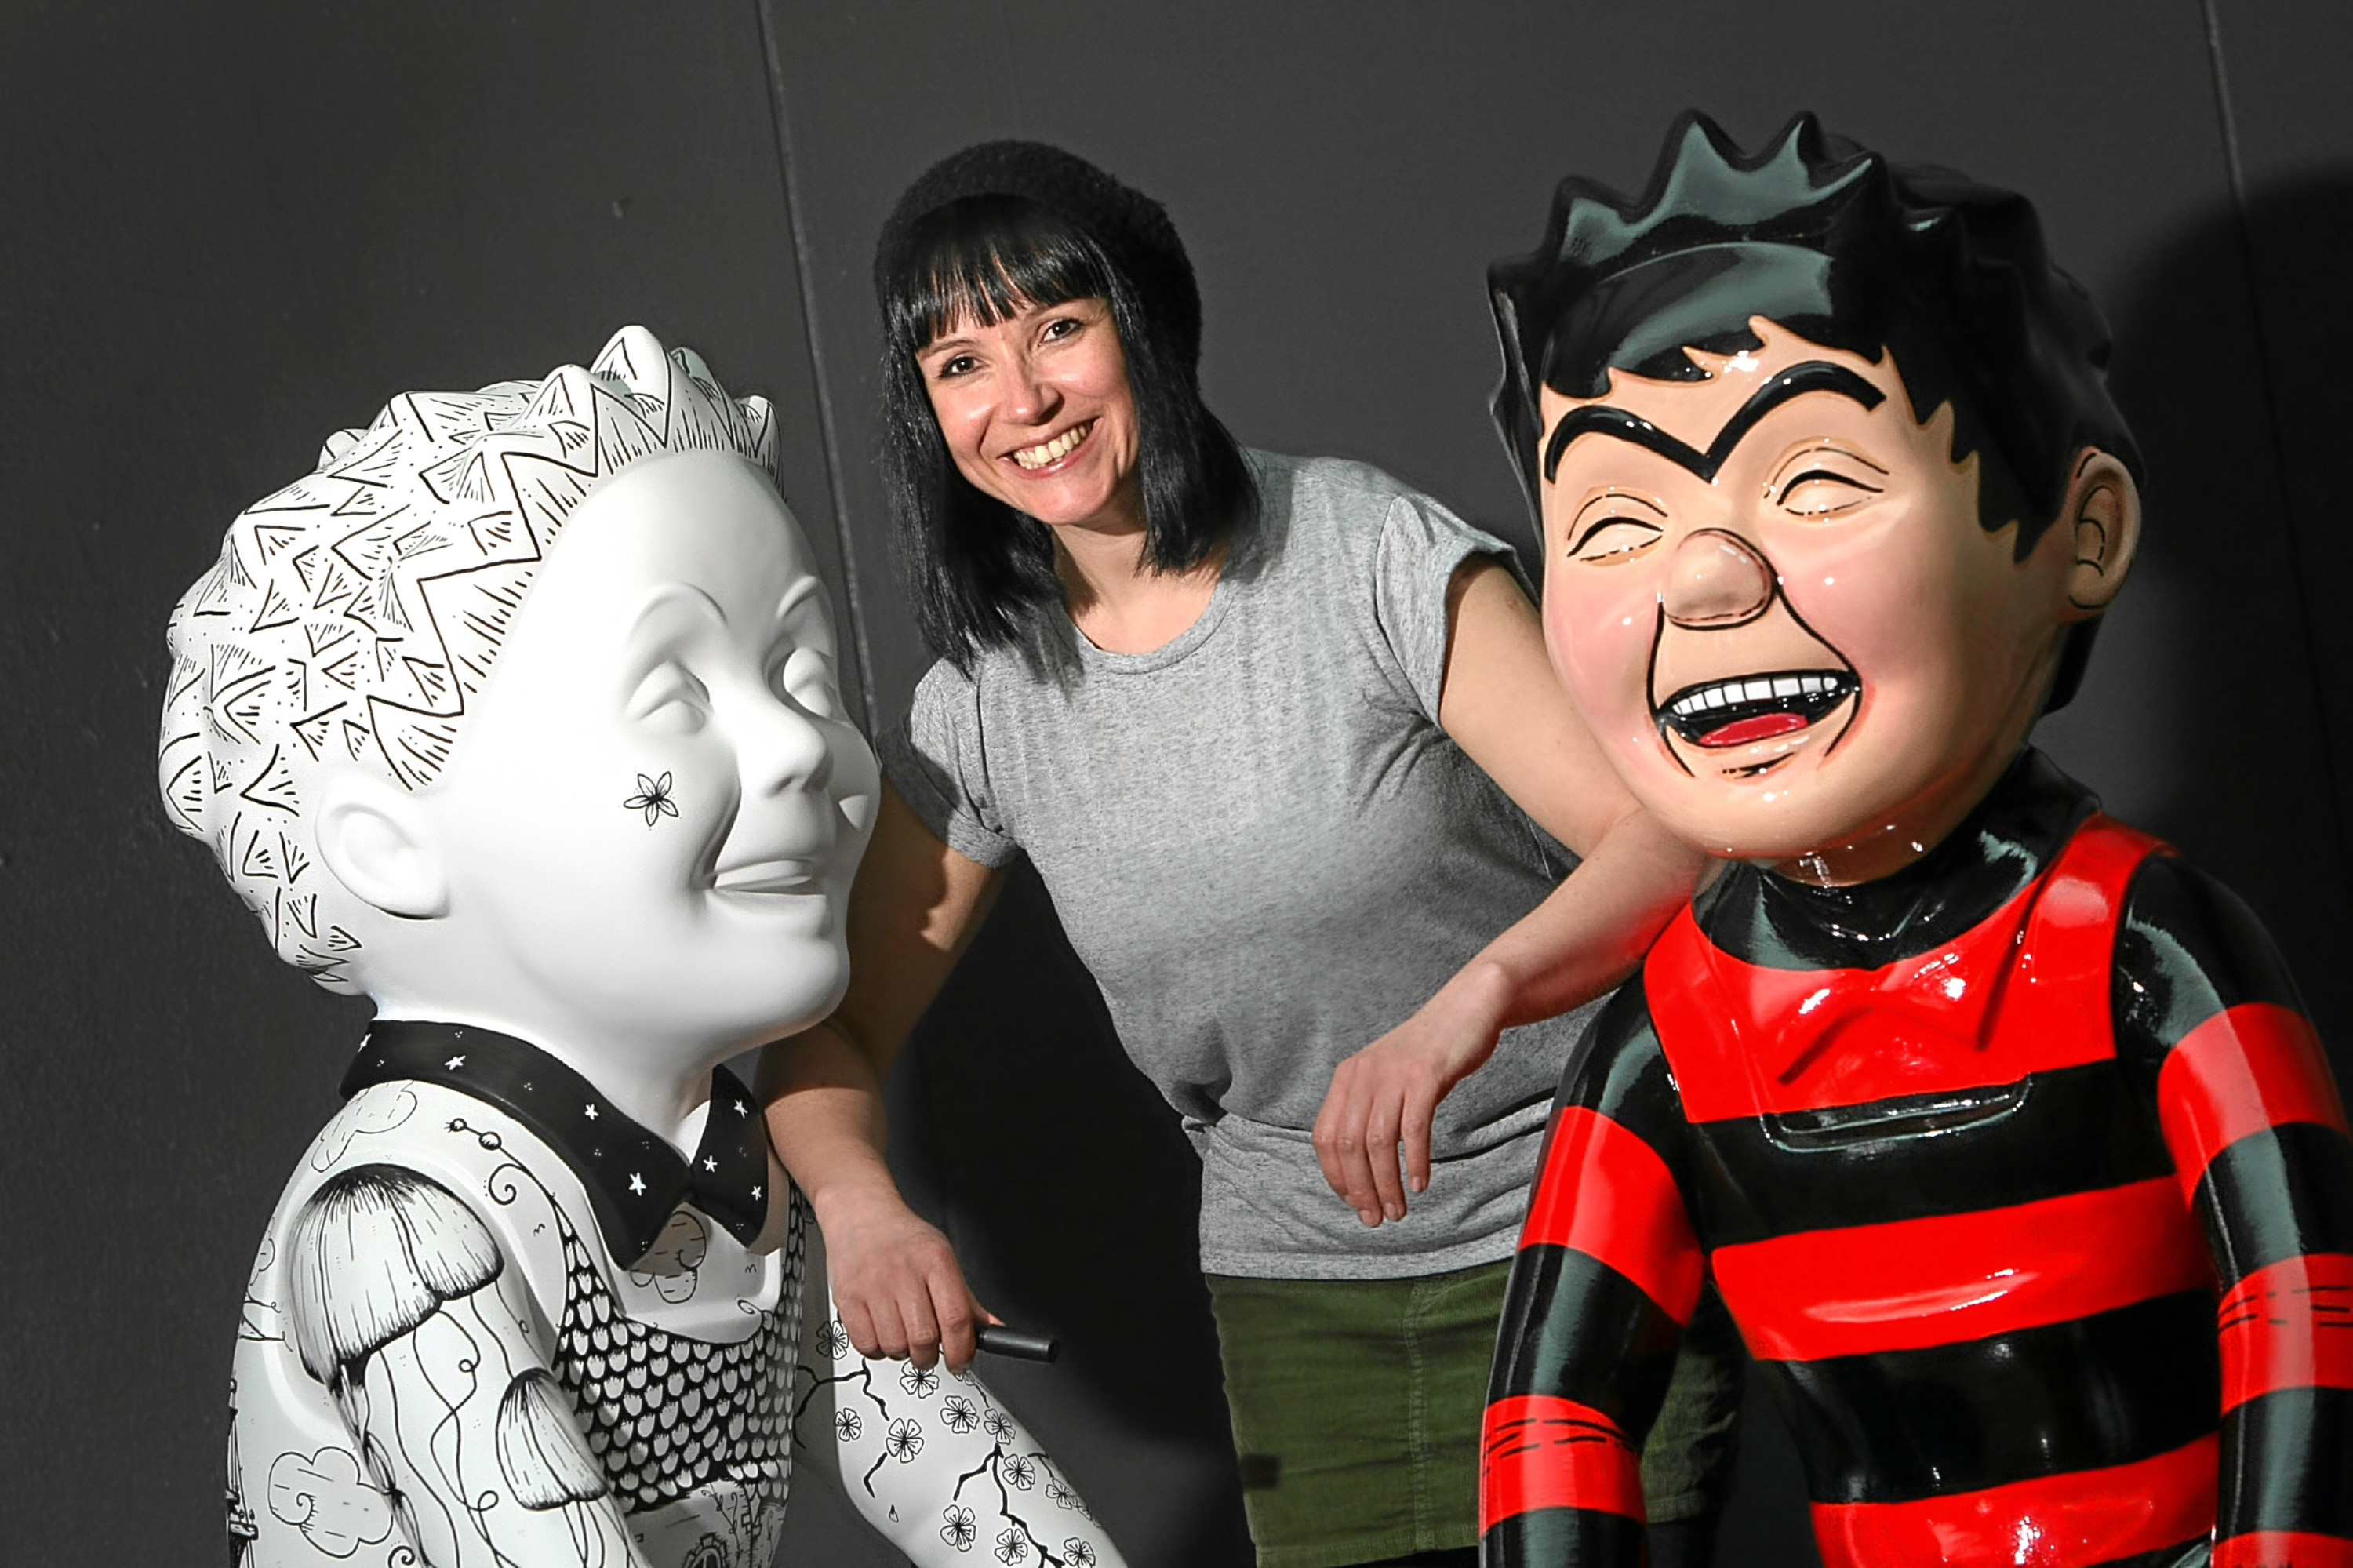 AOS participant and Oor Wullie Bucket Trail art co-ordinator Suzanne Scott.